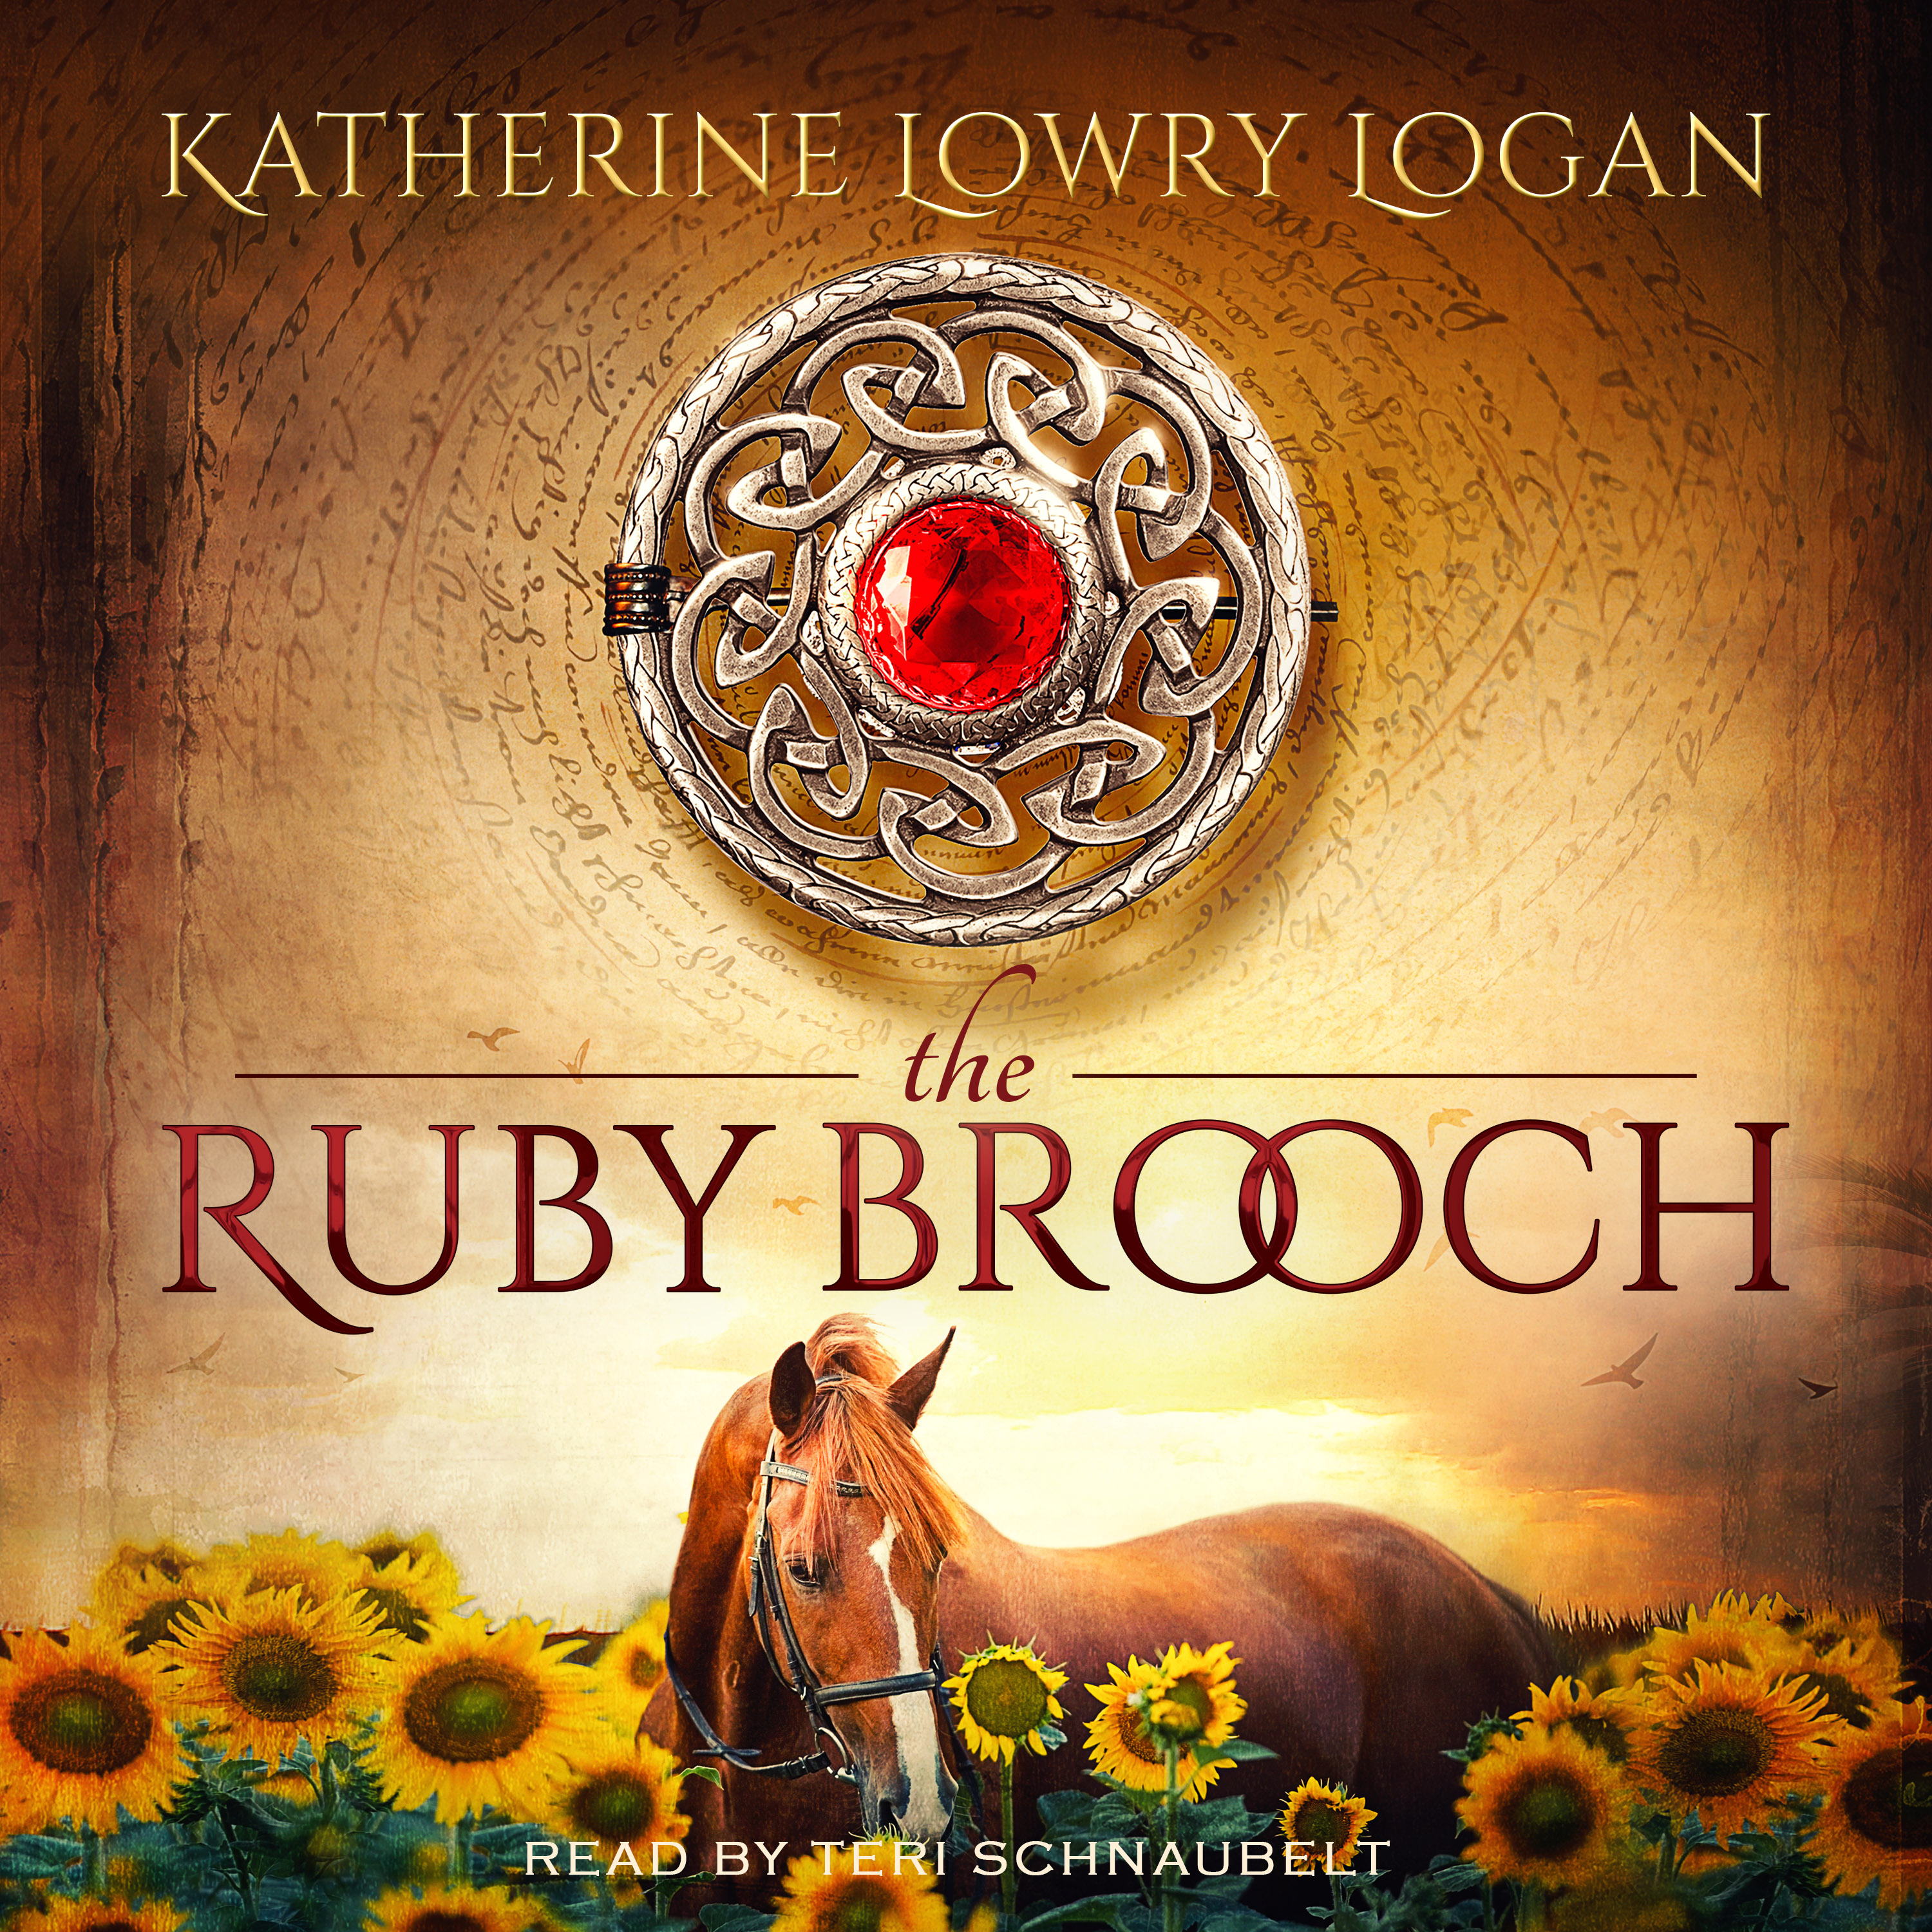 The Ruby Brooch audiobook by Katherine Lowry Logan